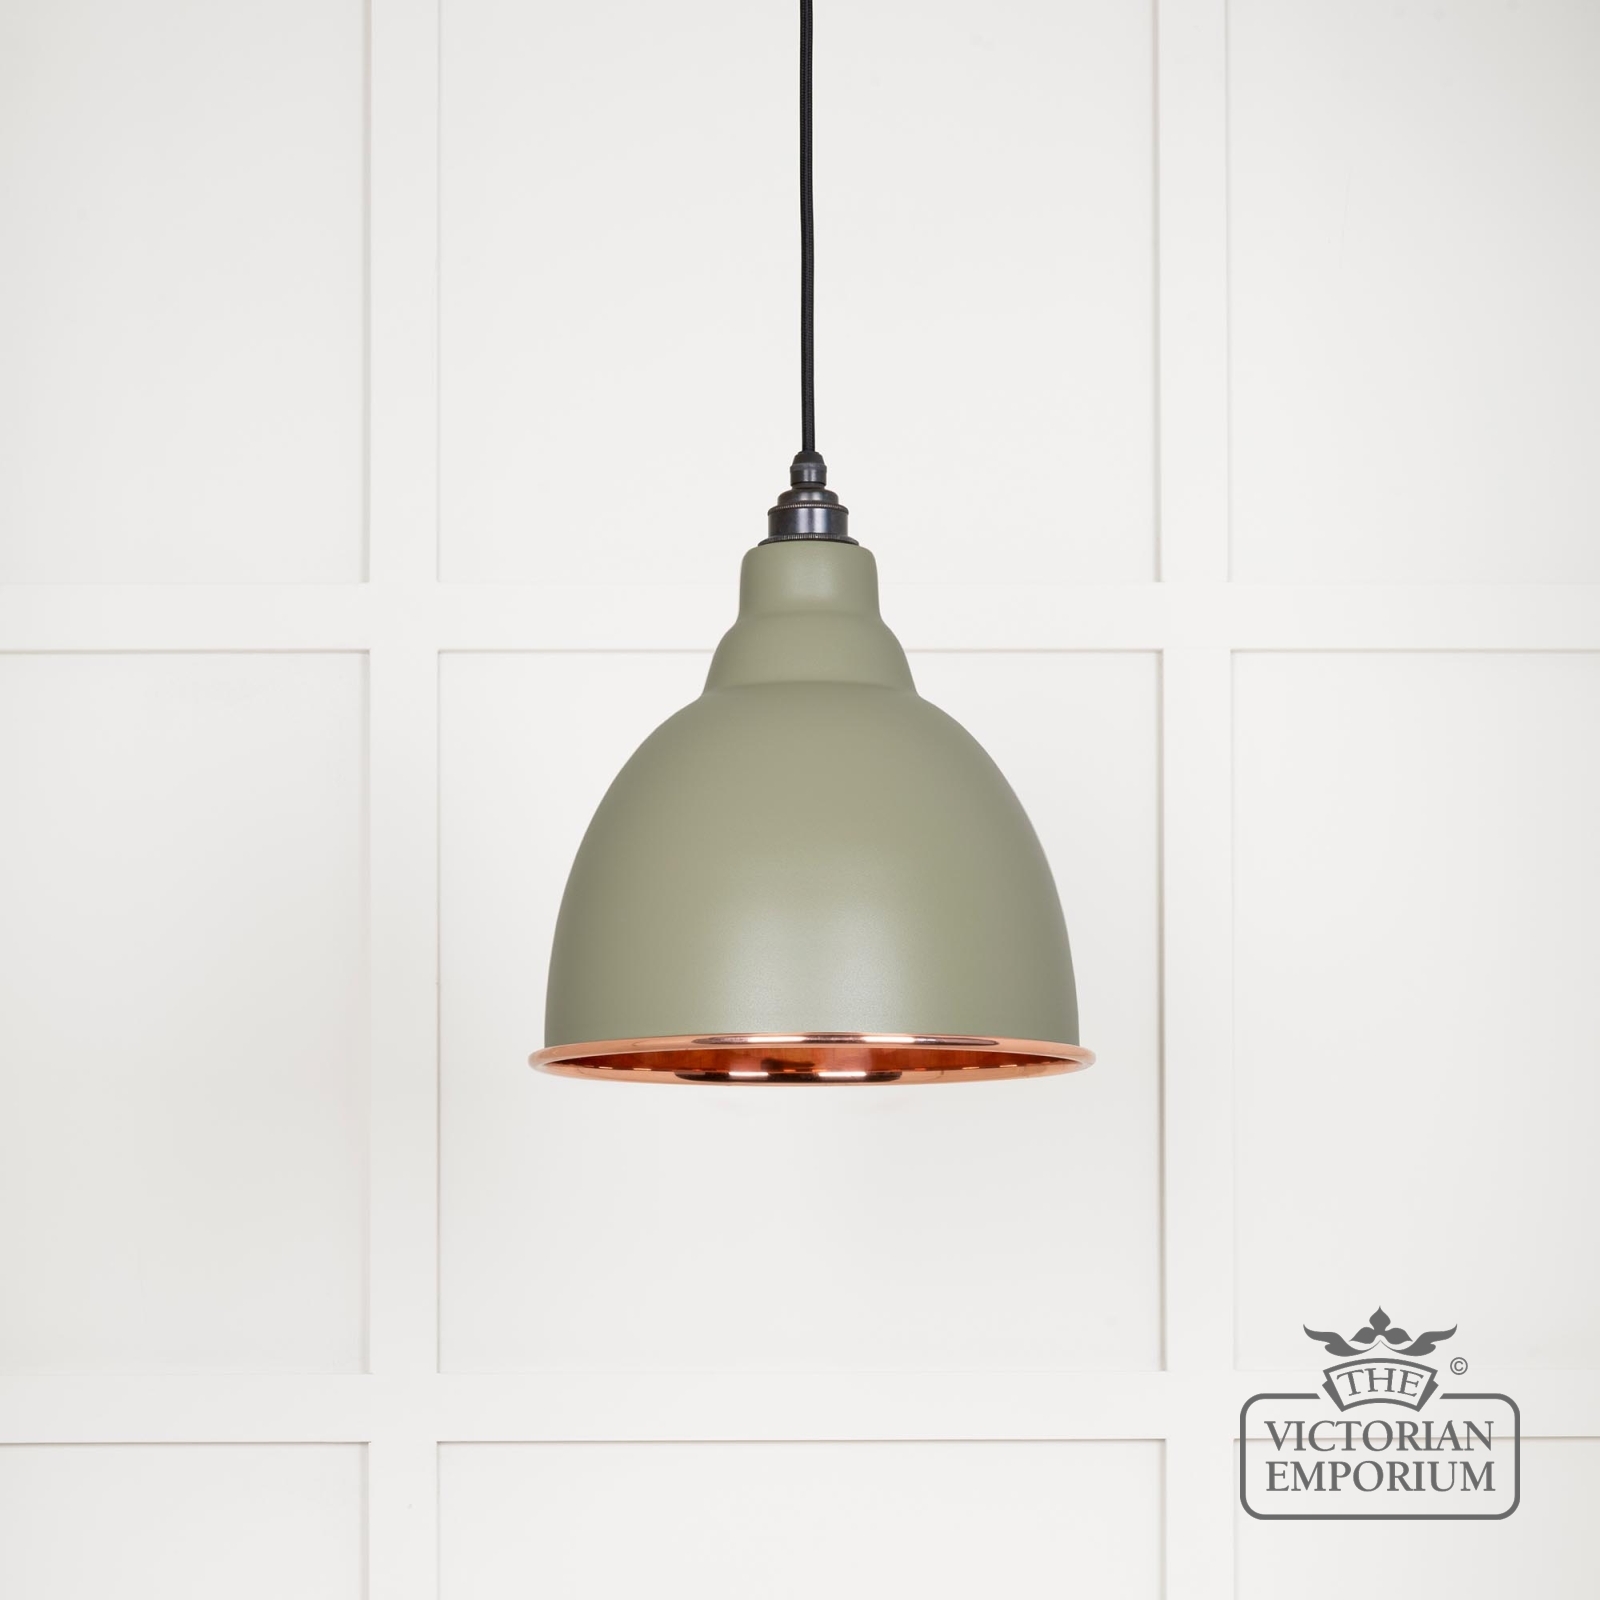 Brindle pendant light in smooth copper with tump exterior